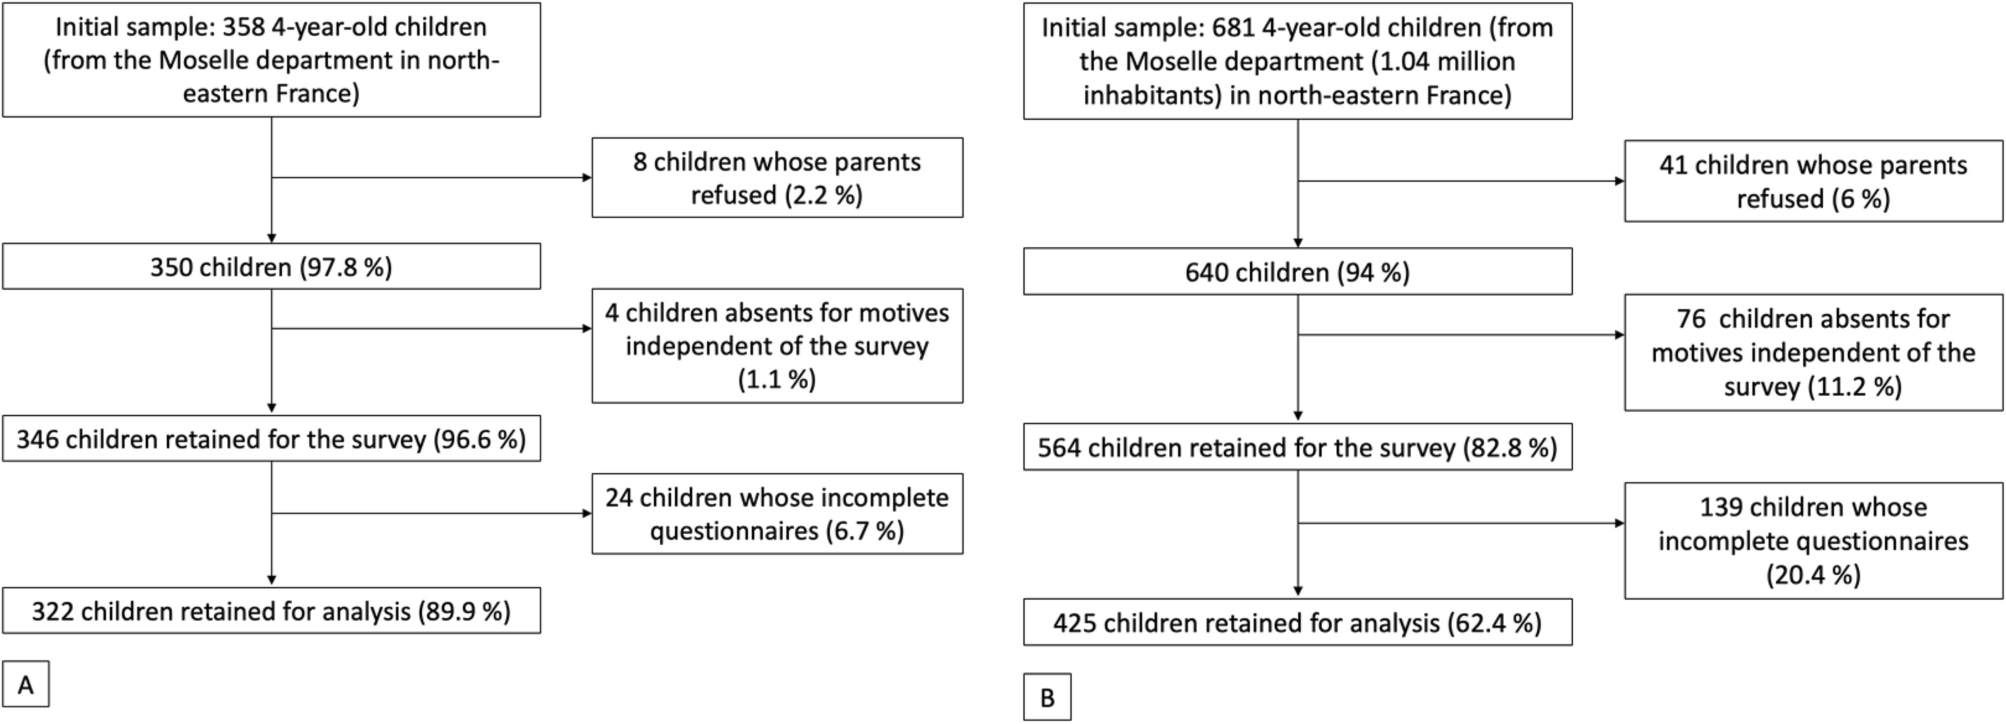 Comparative study of the dental health of 4-year-old children in north-eastern France between 2001 and 2018